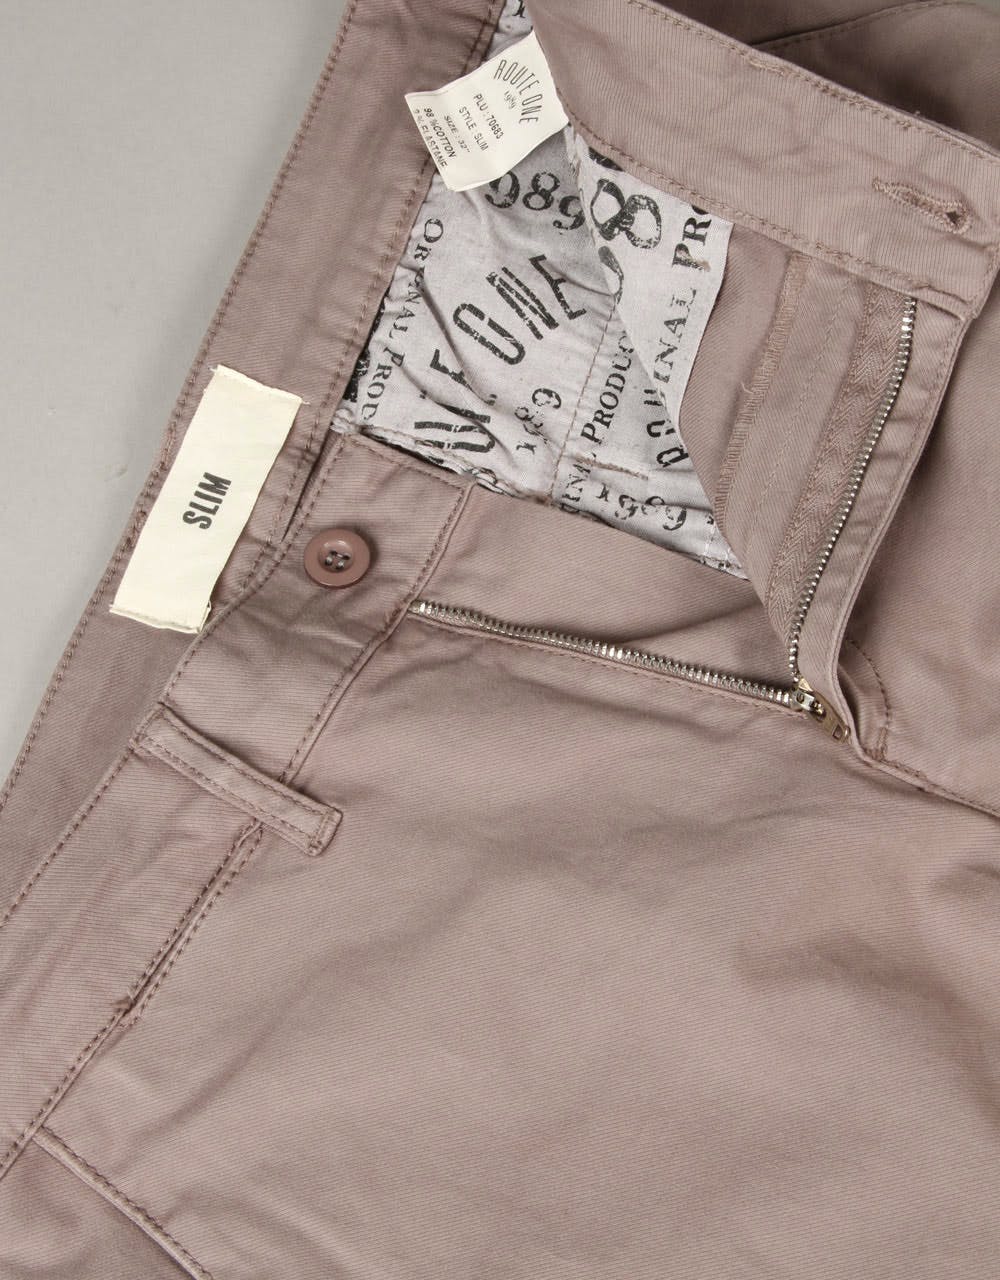 Route One Slim Fit Chinos - Grey